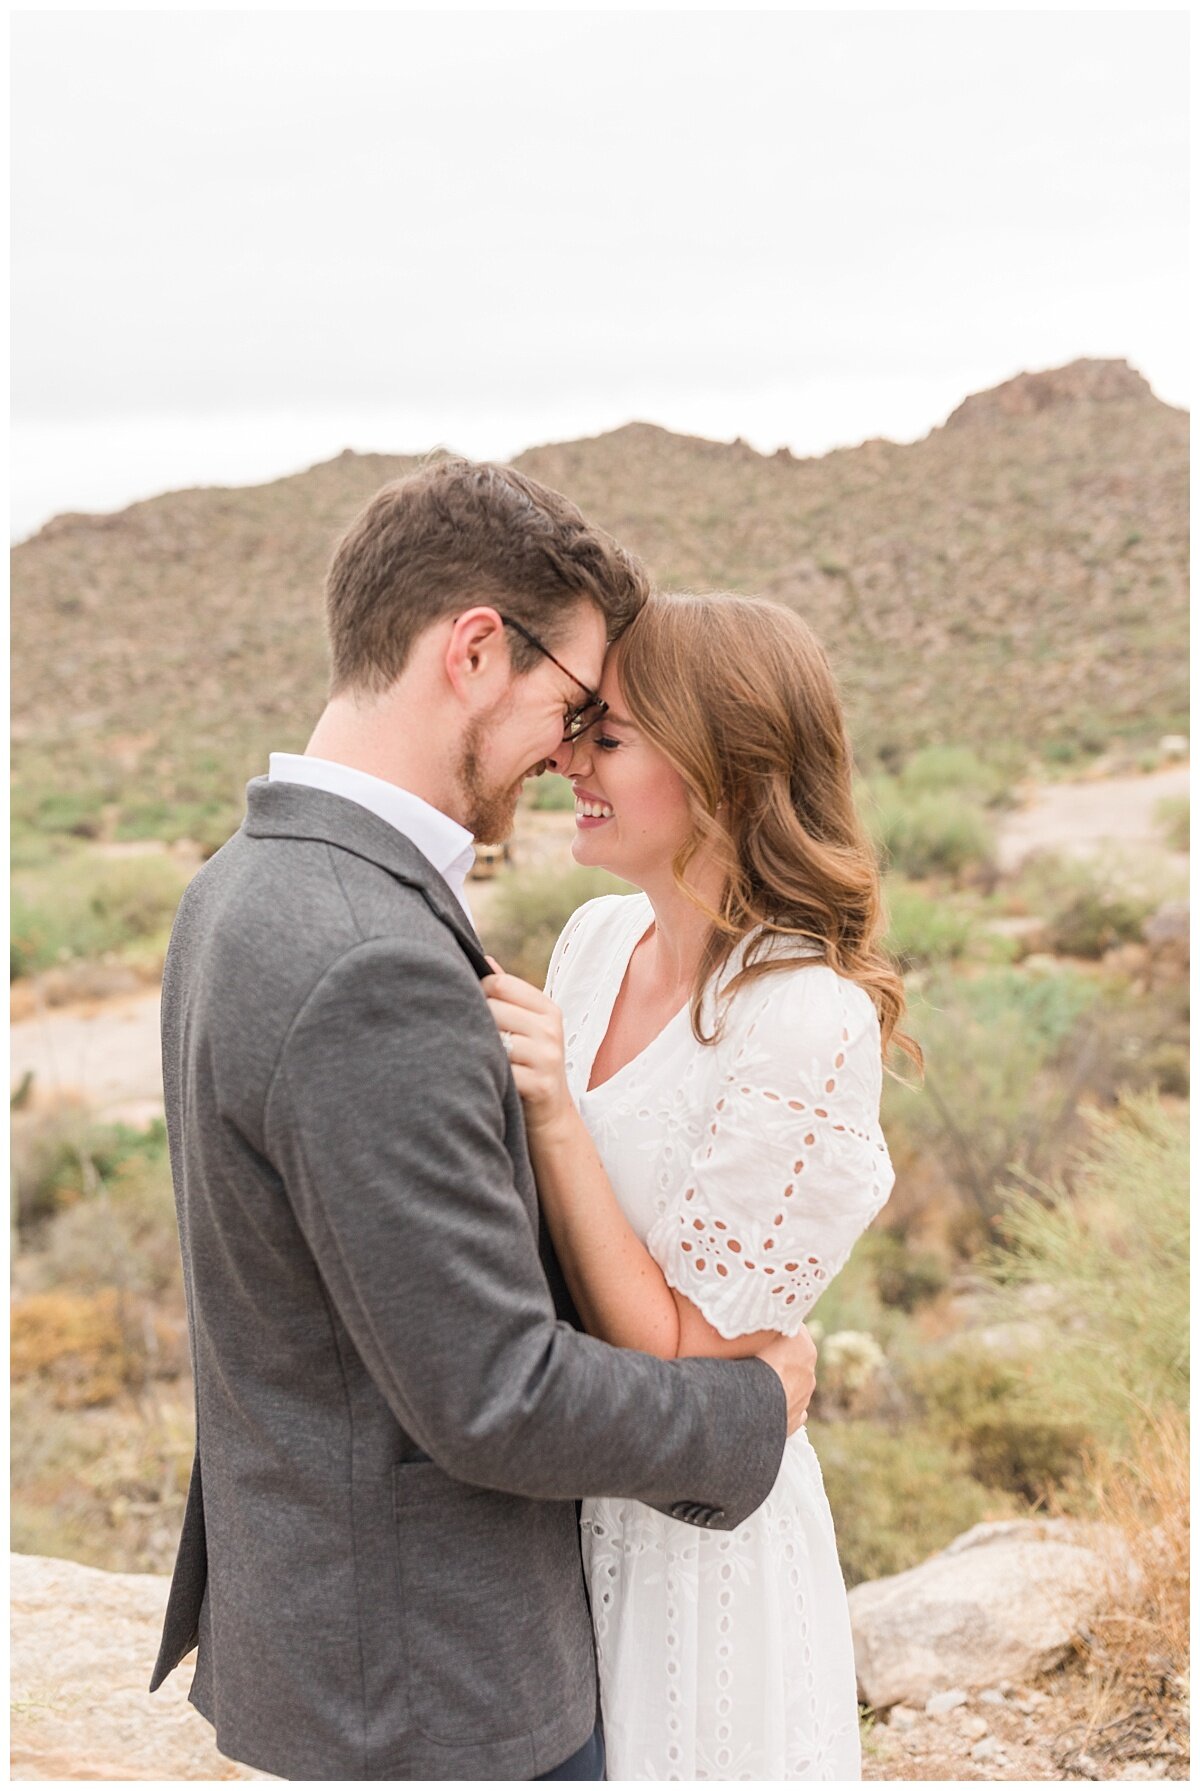 How to plan your dream desert wedding. Desert engagement session with Tucson Mountains as a backdrop.